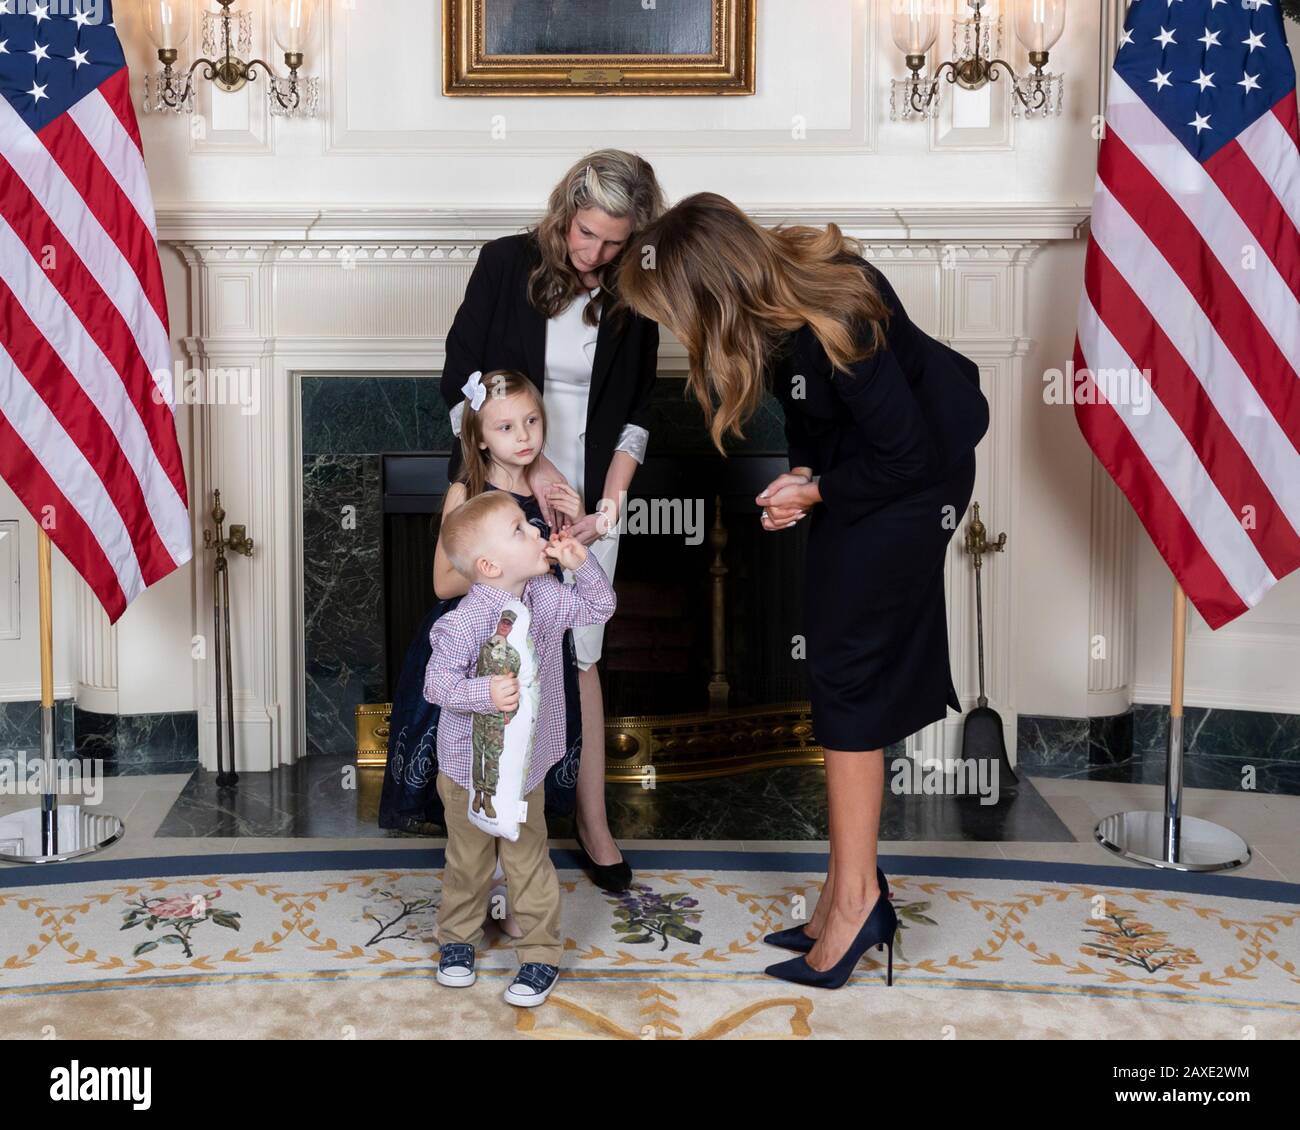 U.S First Lady Melania Trump greets Amy Williams and her children 6 year-old Elliana and 3 year-old Rowan during a reception for State of the Union gallery guests in the Diplomatic Reception Room of the White House February 4, 2020 in Washington, DC. Stock Photo